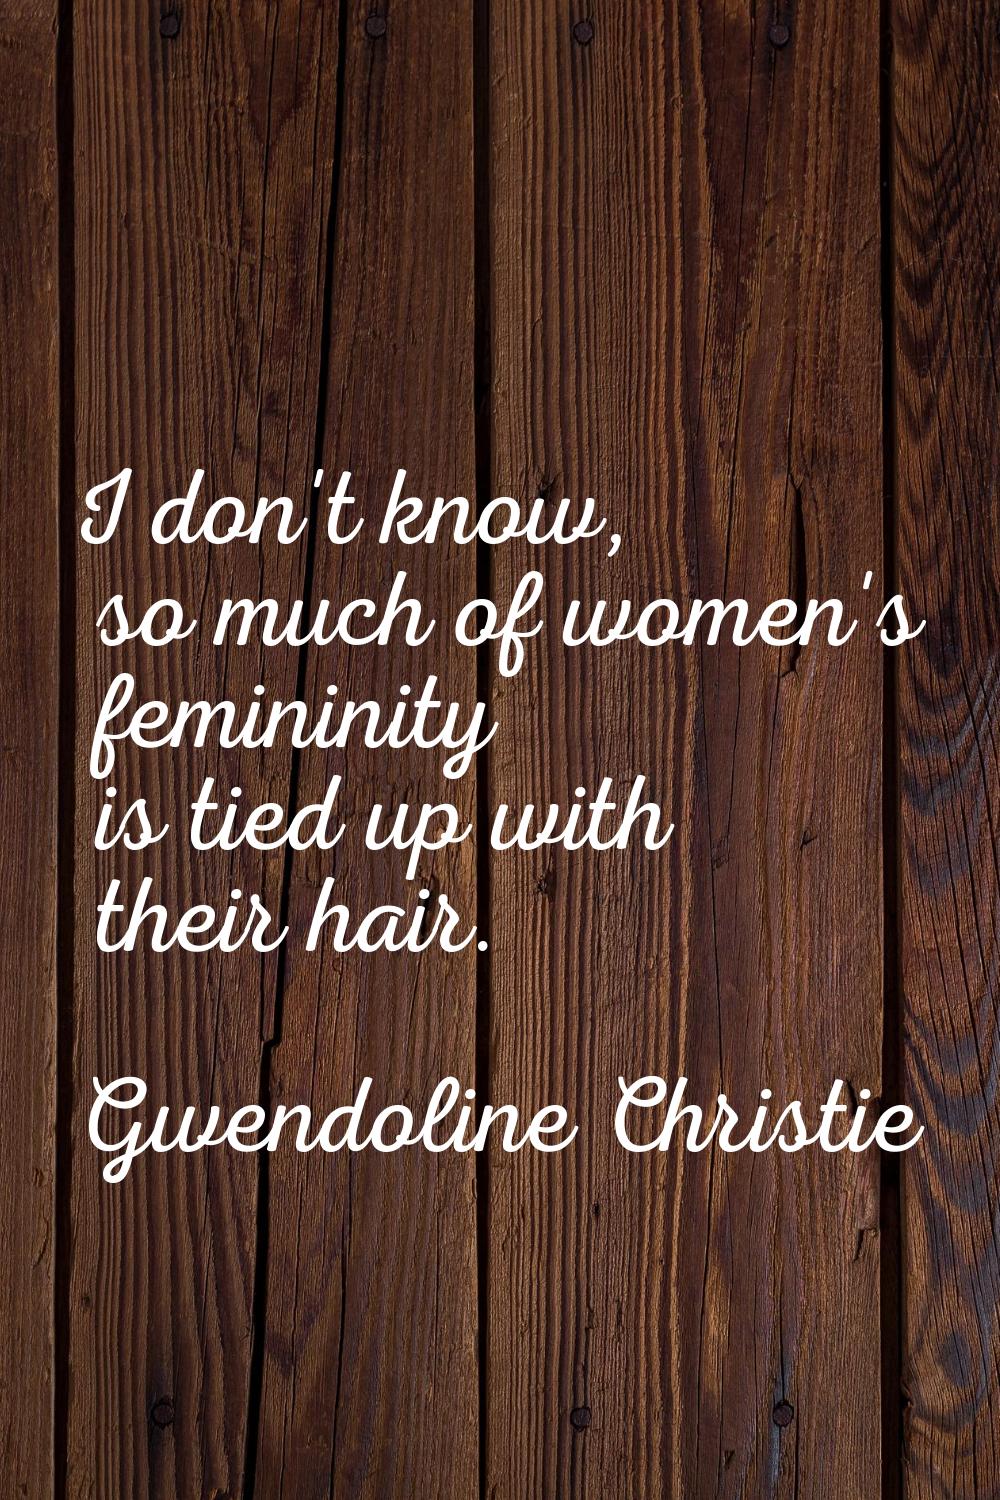 I don't know, so much of women's femininity is tied up with their hair.